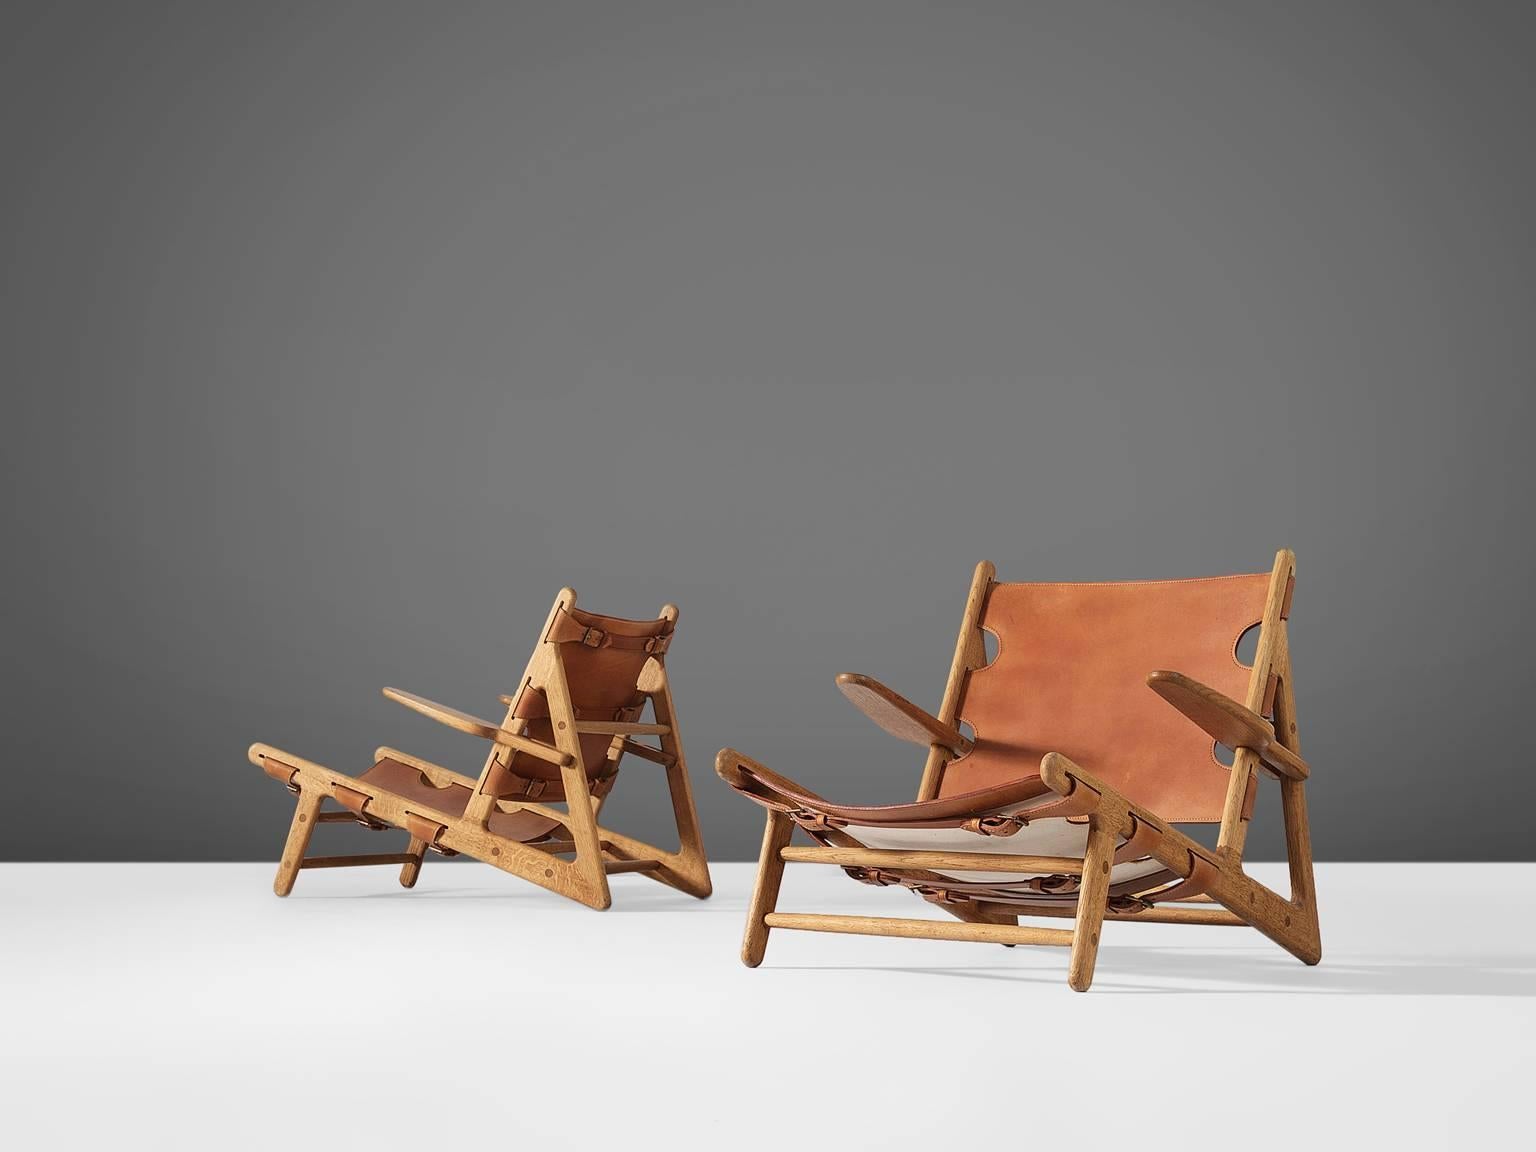 Børge Mogensen for Fredericia Stolefabrik, hunting chairs, oak and cognac saddle leather, Denmark 1950. 

The hunting chair was Mogensens first work with a solid wooden frame and saddle leather seating. This iconic piece was the first in a line of